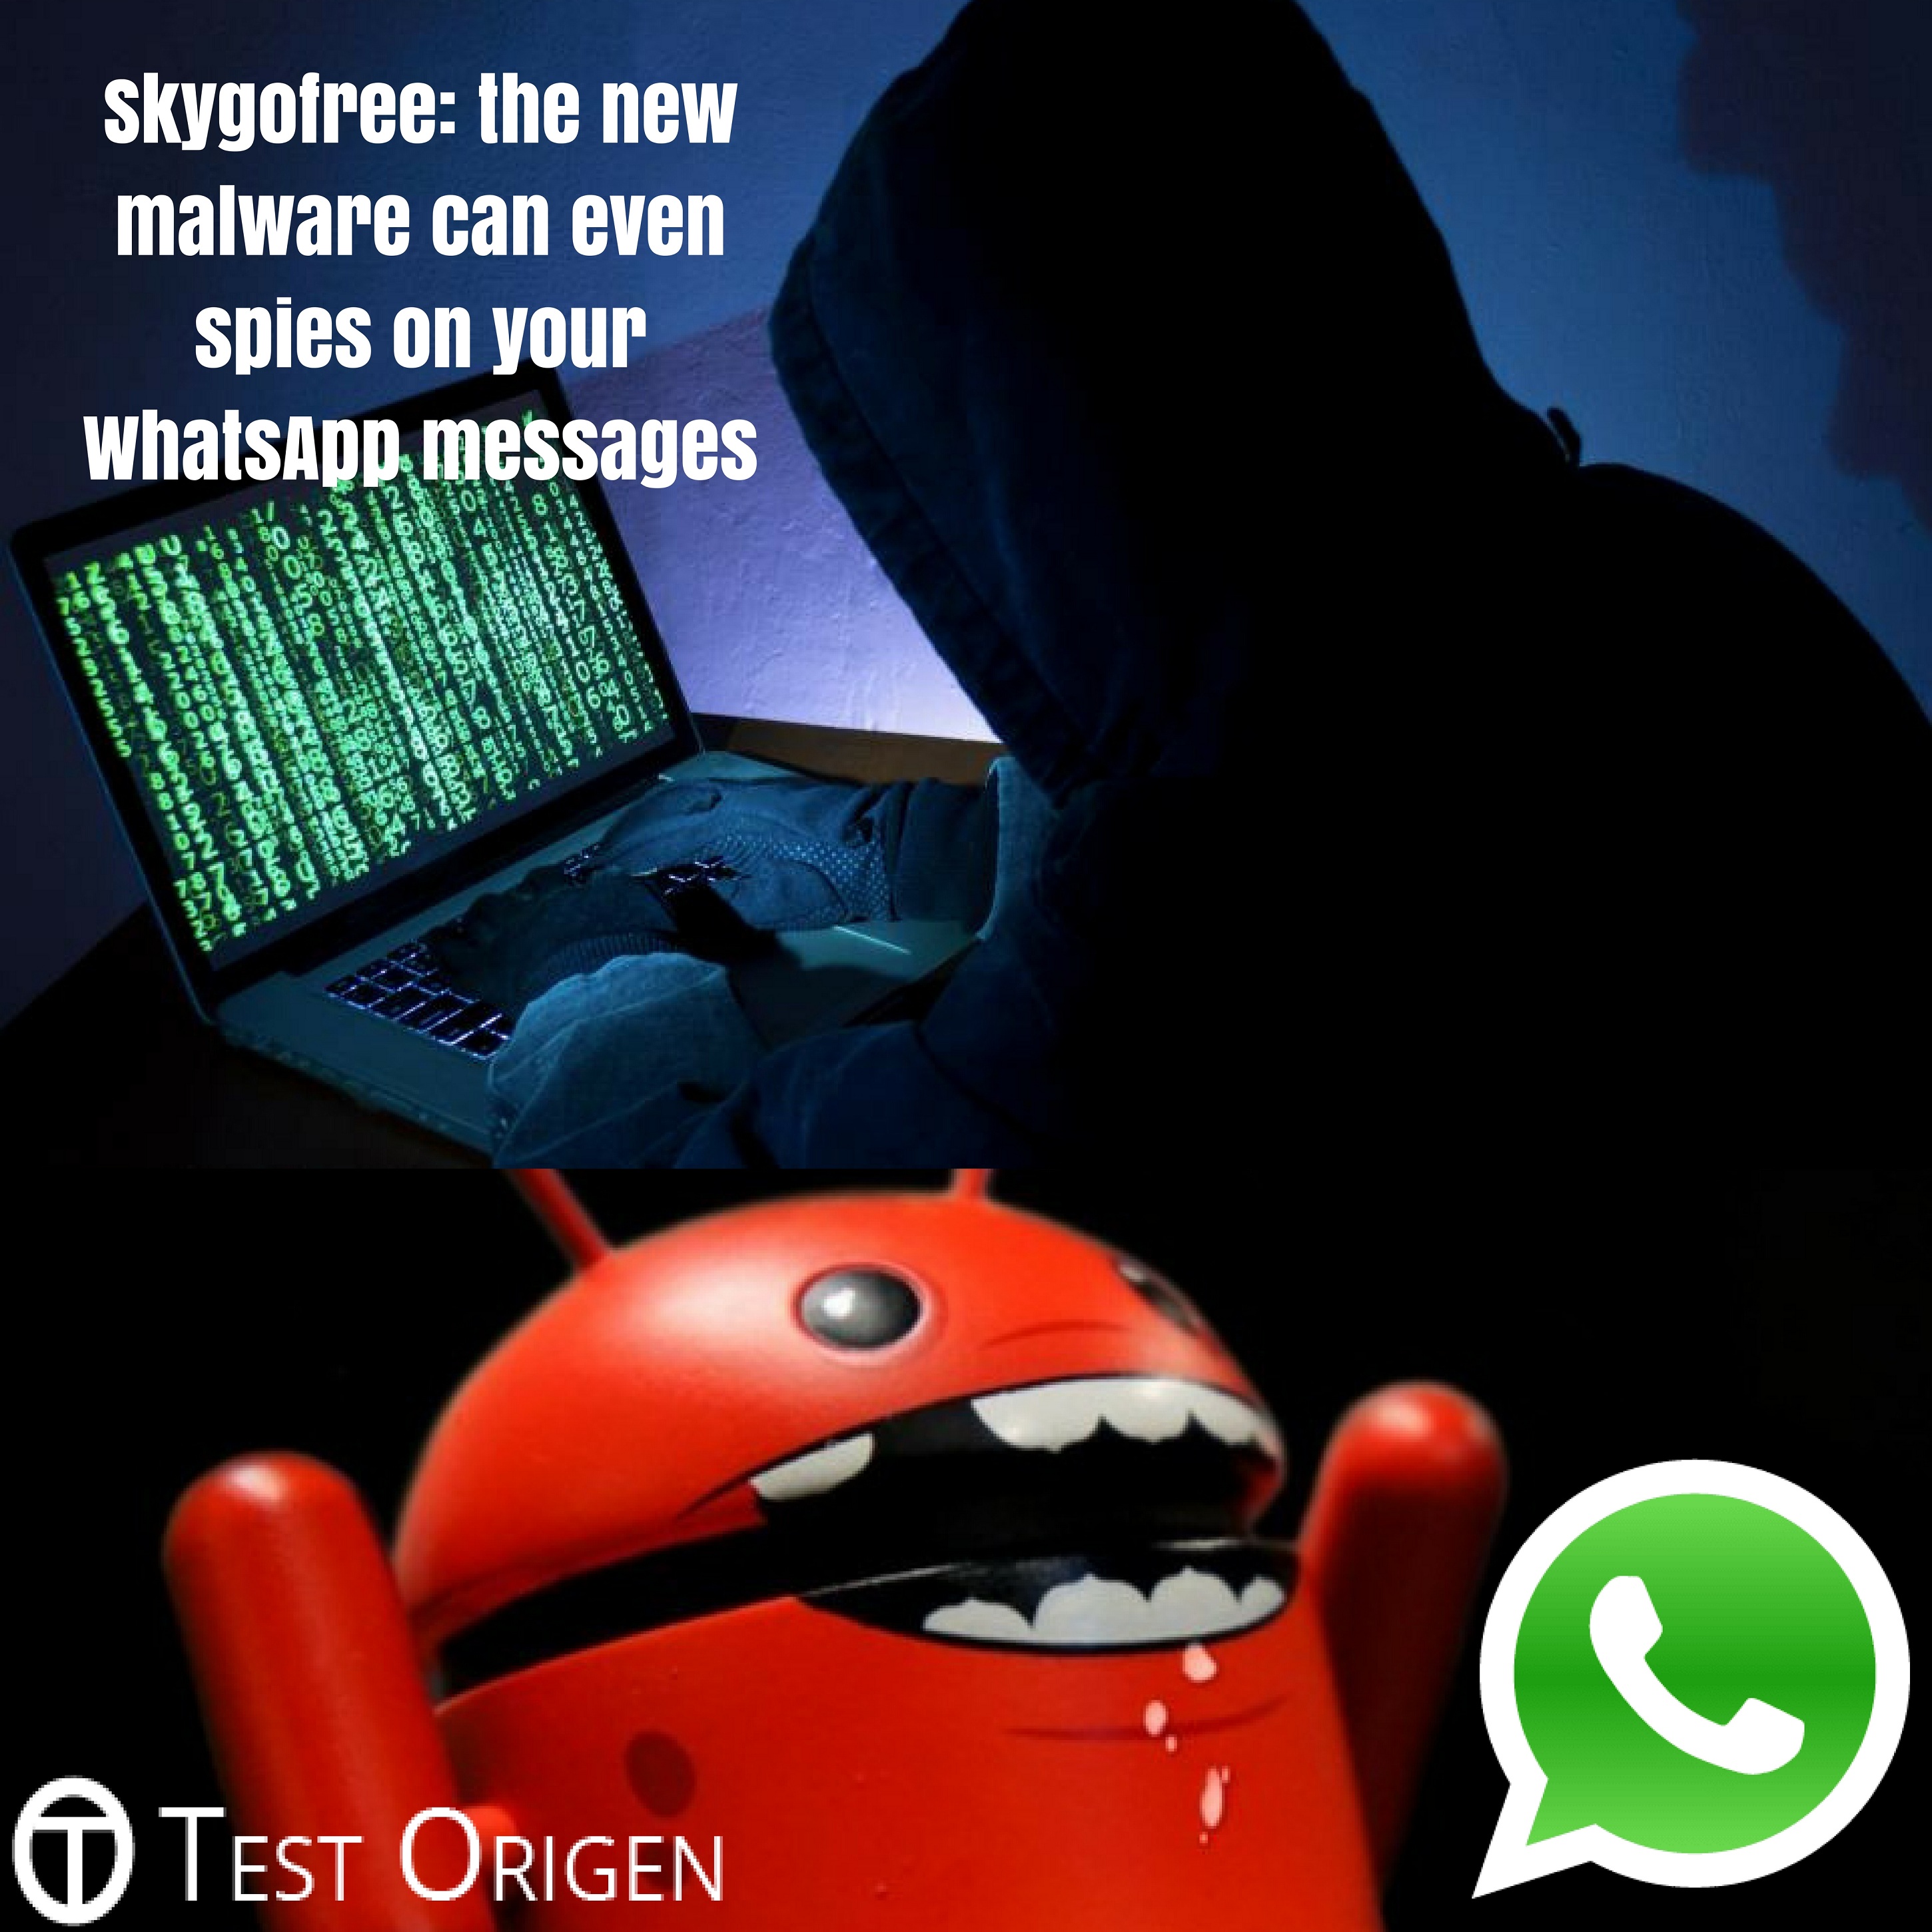 Skygofree: the new malware can even spies on your WhatsApp messages